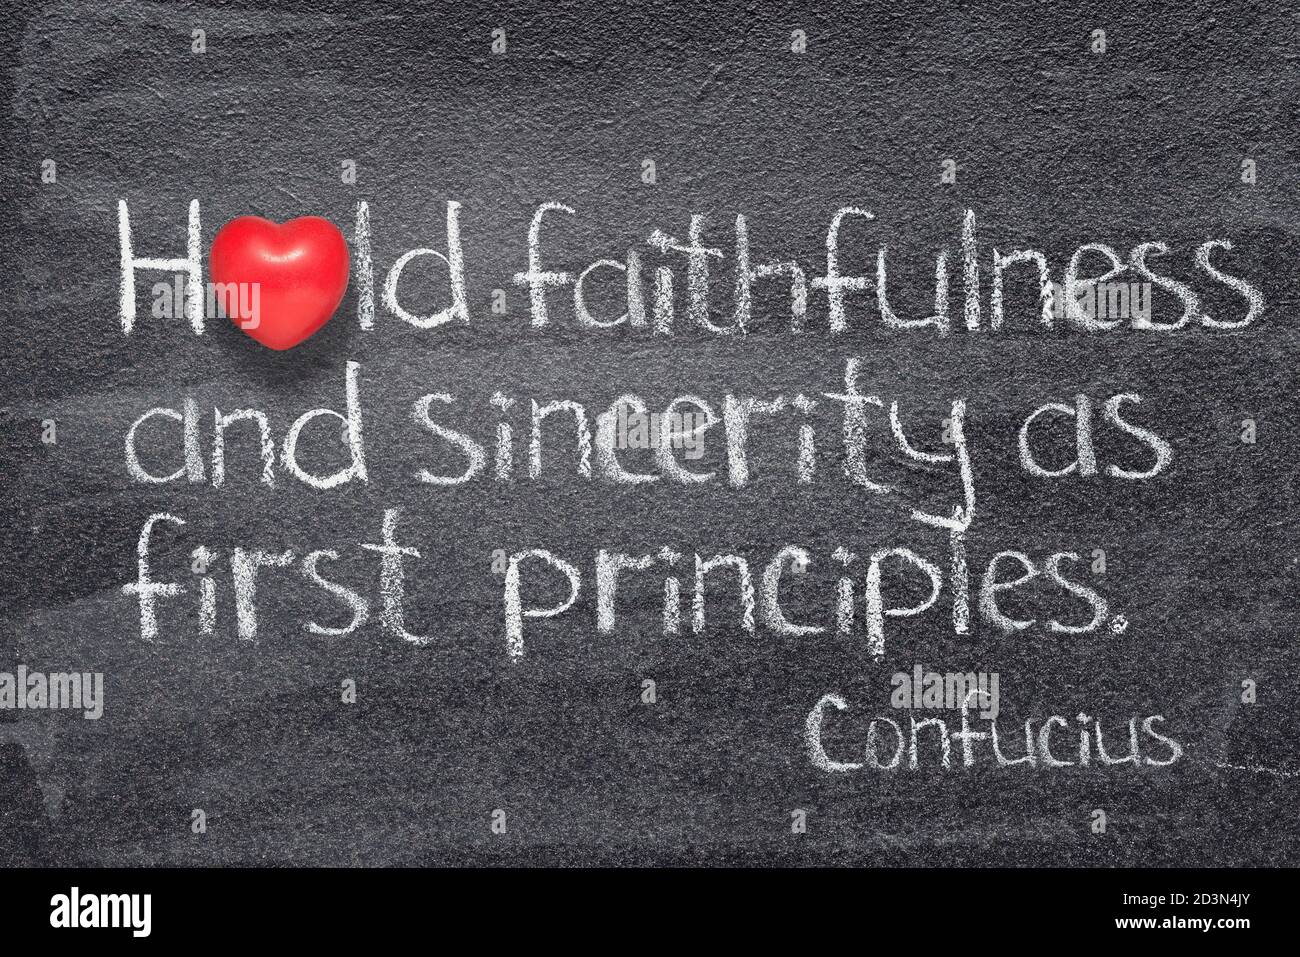 Hold faithfulness and sincerity as first principles - ancient Chinese philosopher Confucius concept quote written on chalkboard Stock Photo